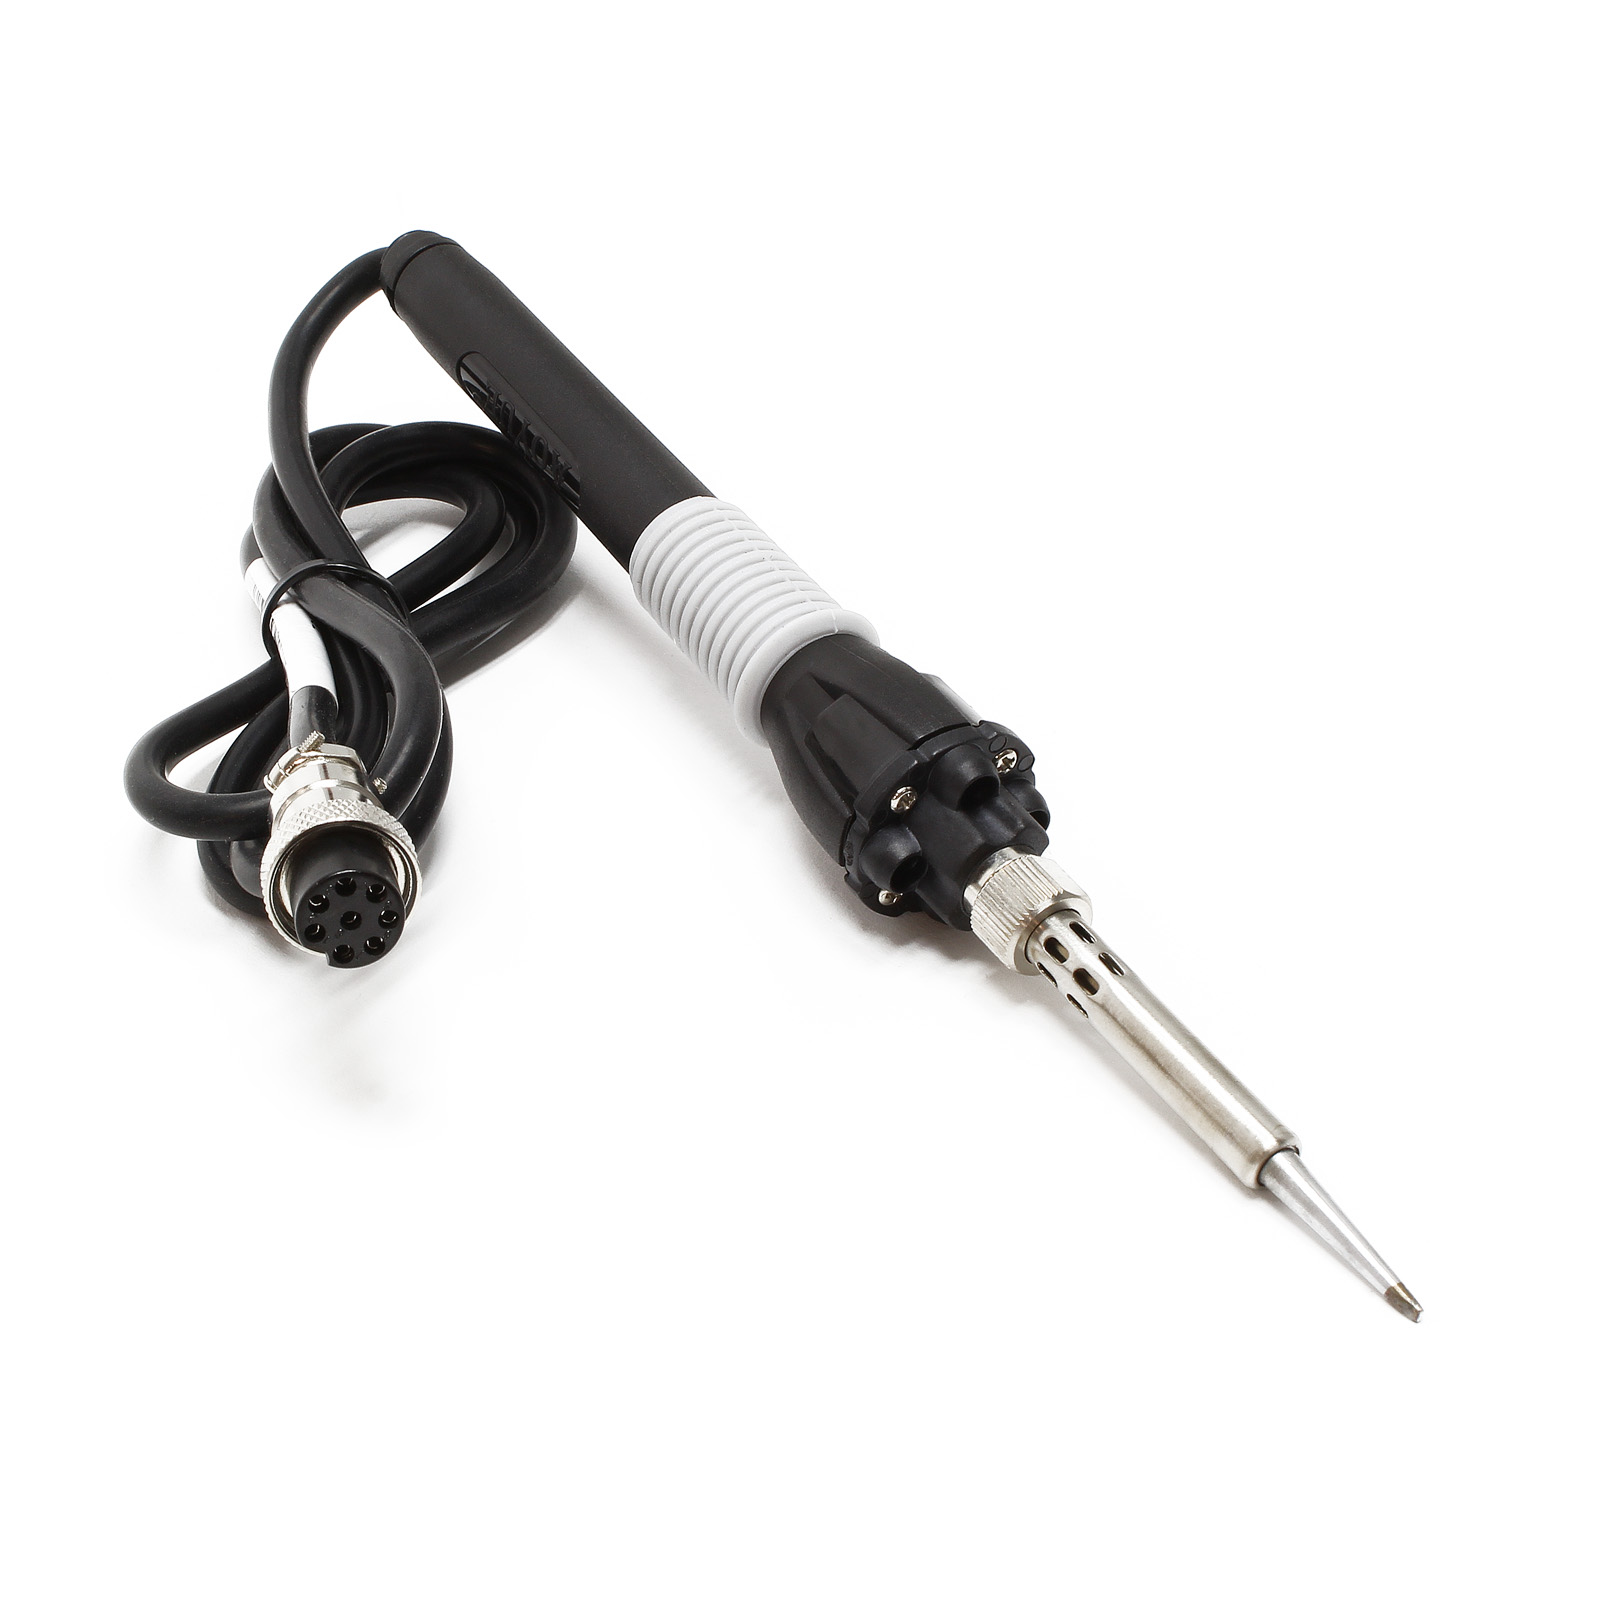 AOYUE B033-P Soldering Iron w/ Light for INT9378 Pro Soldering Station